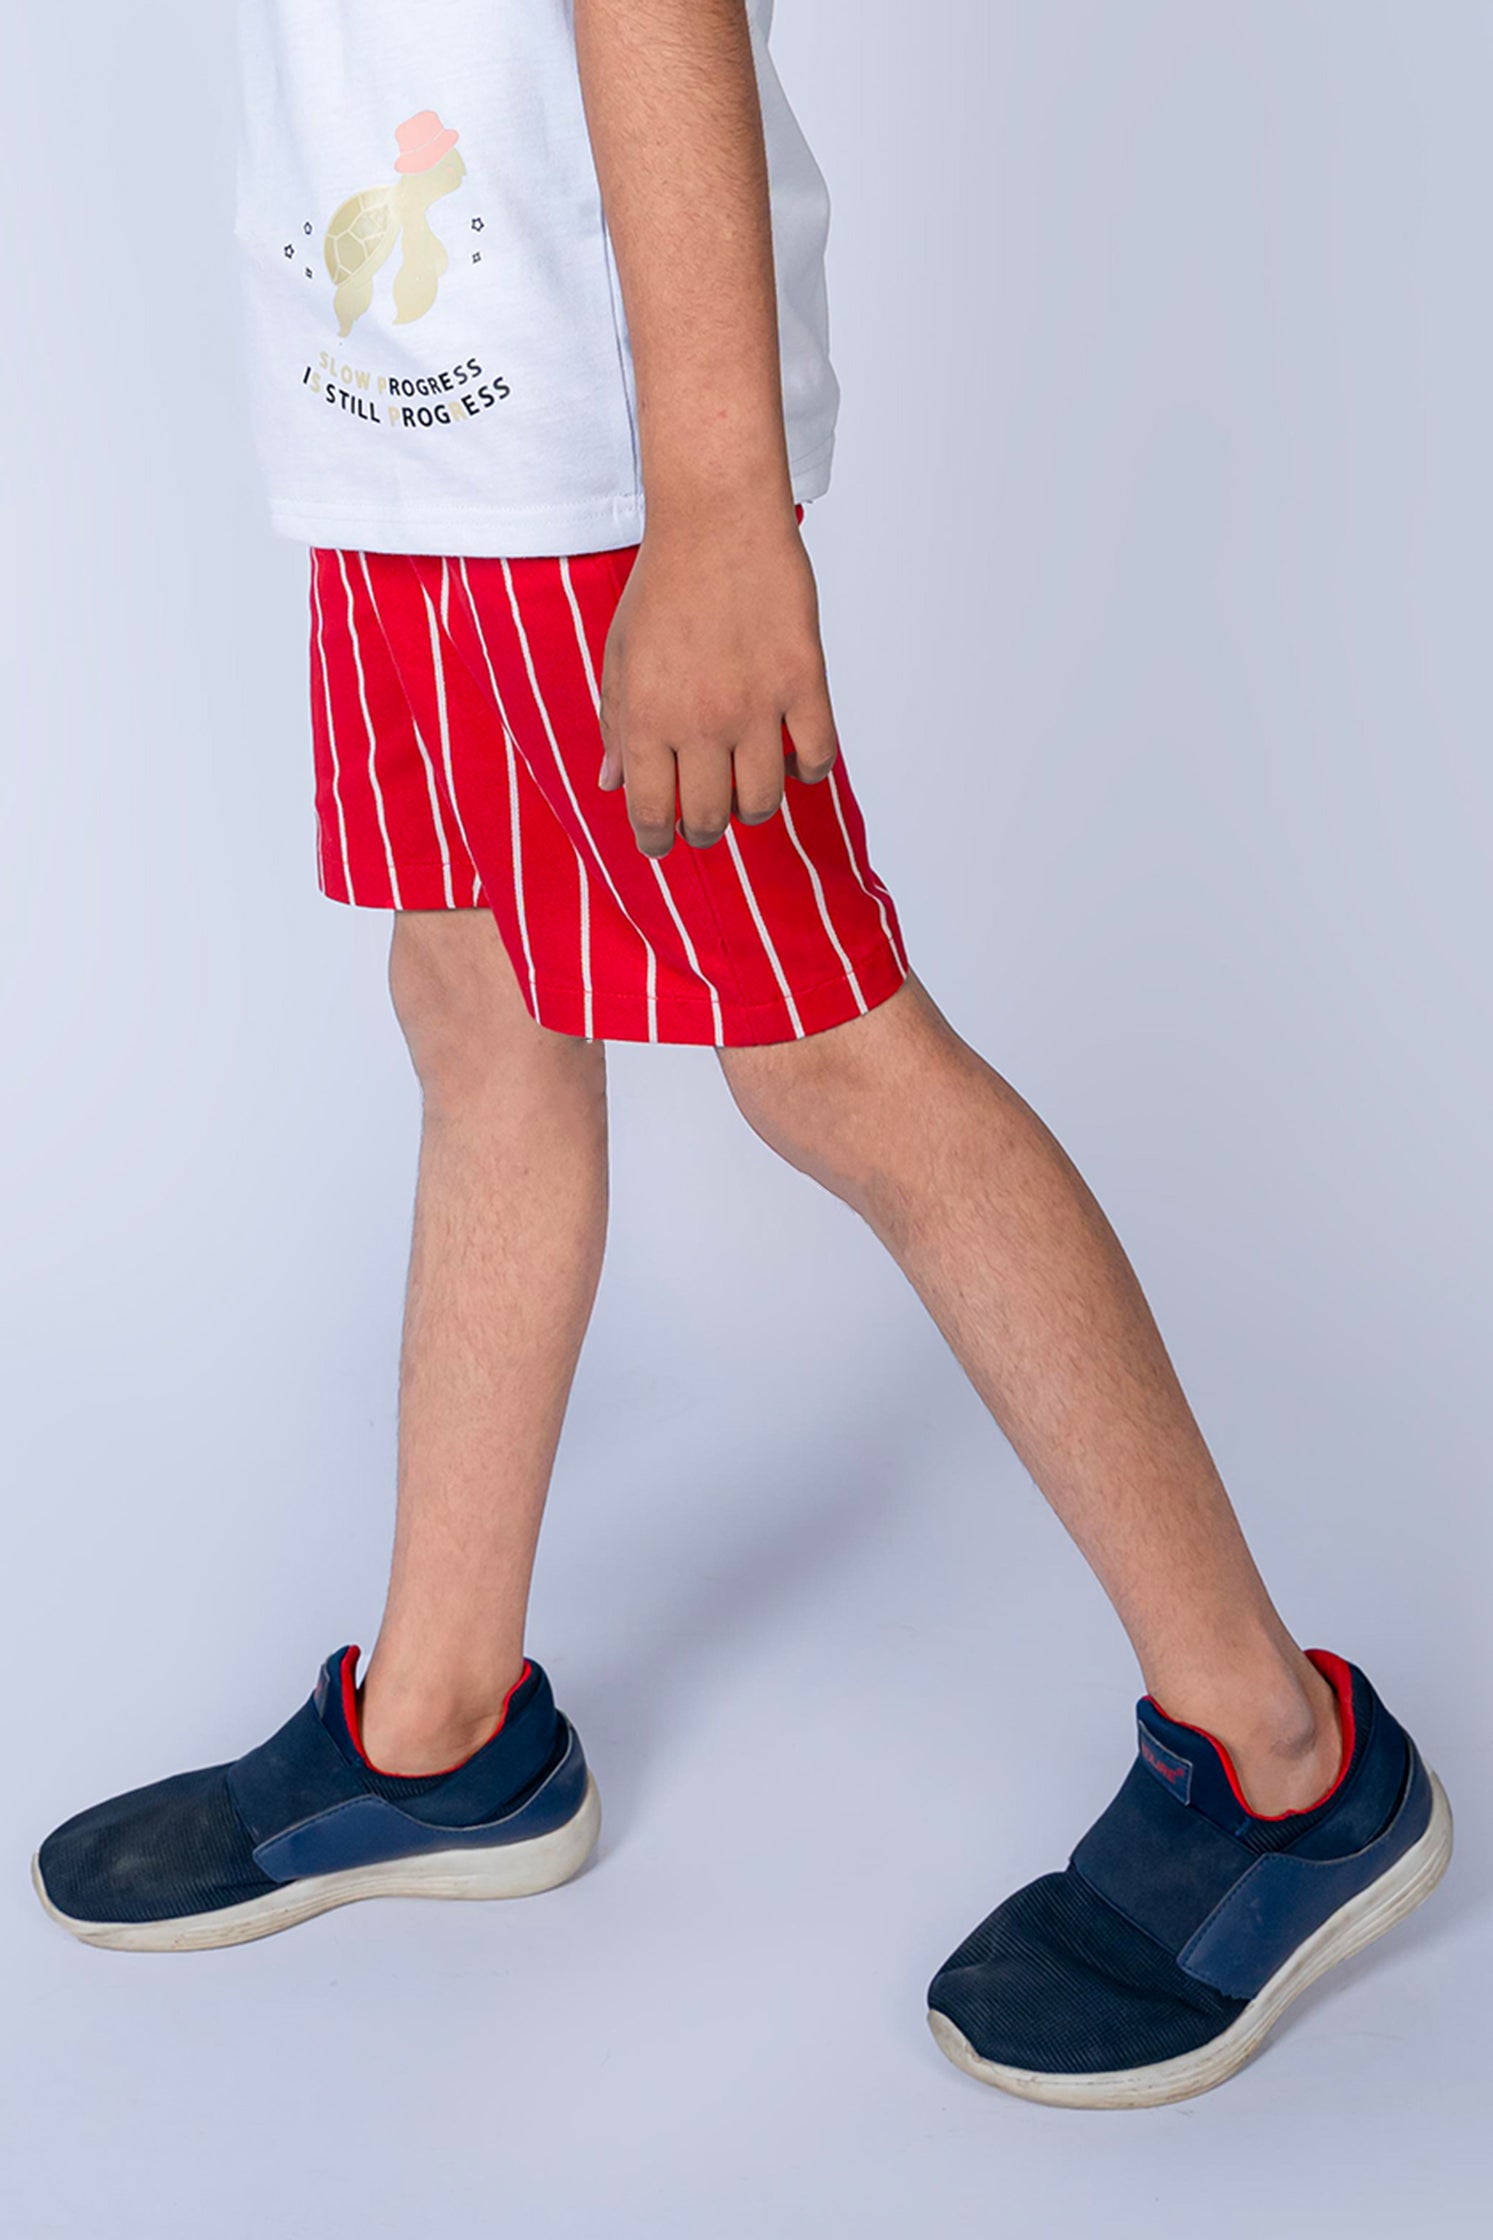 BOYS TWILL SHORTS RED WITH WHITE LINE